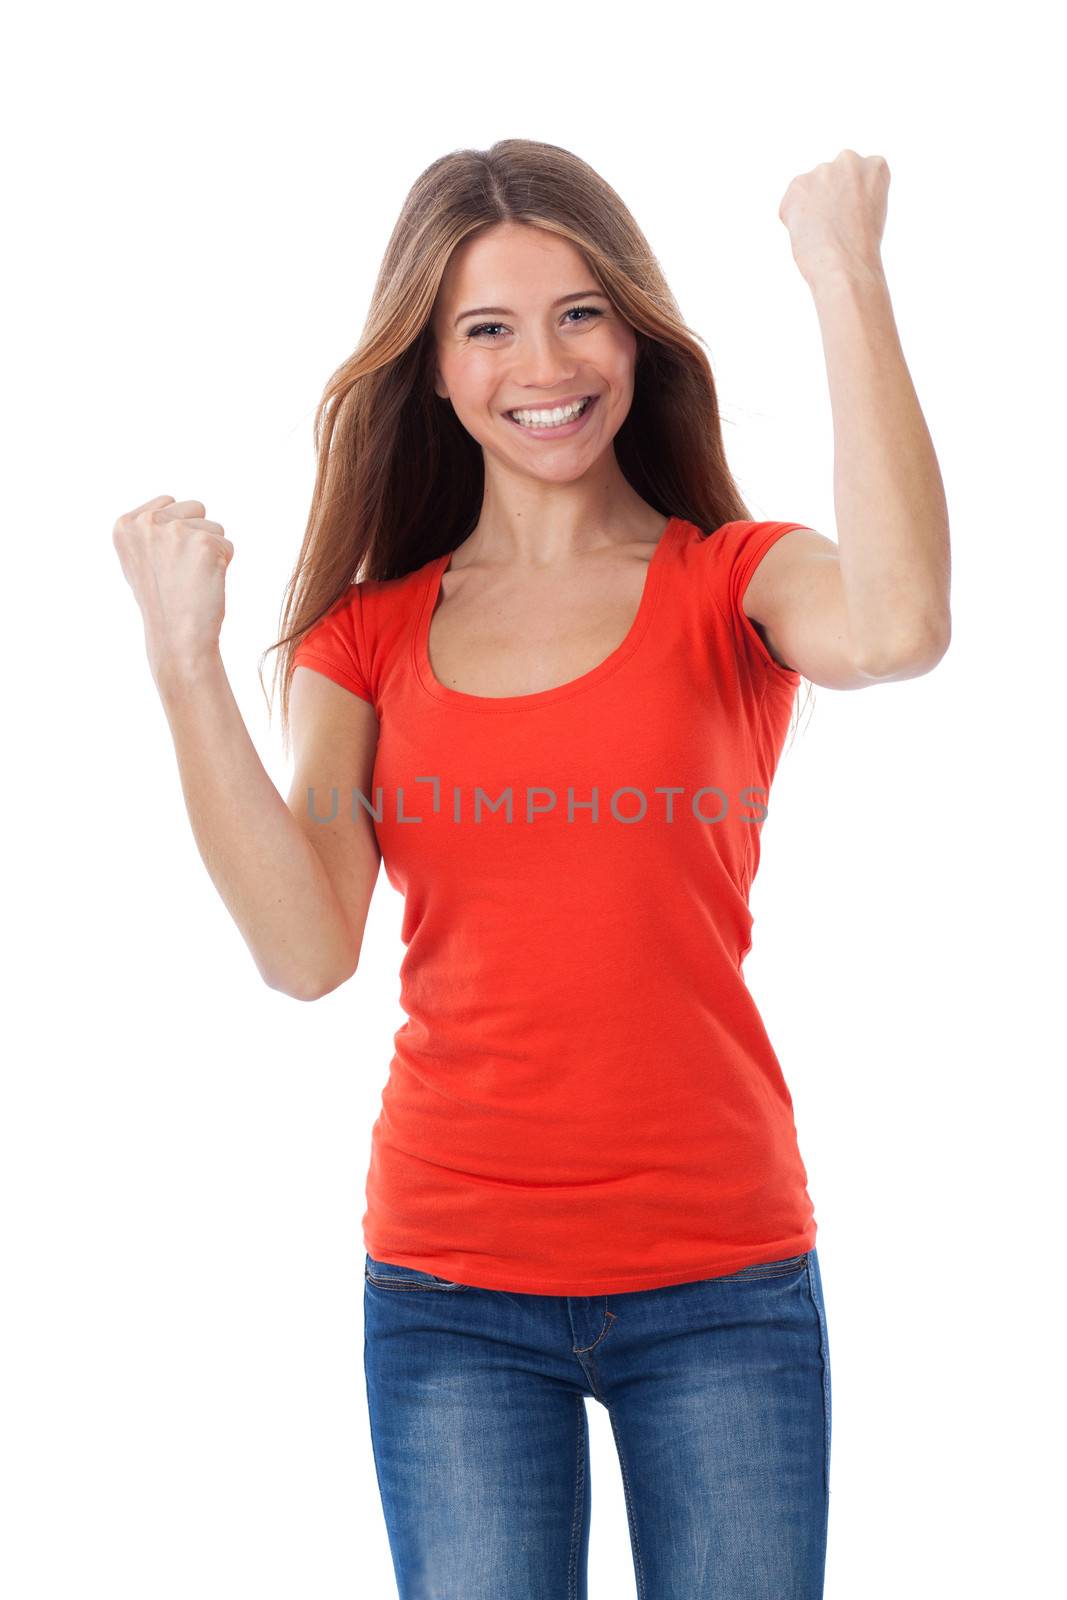 Very happy woman having a successful gesture, isolated on white